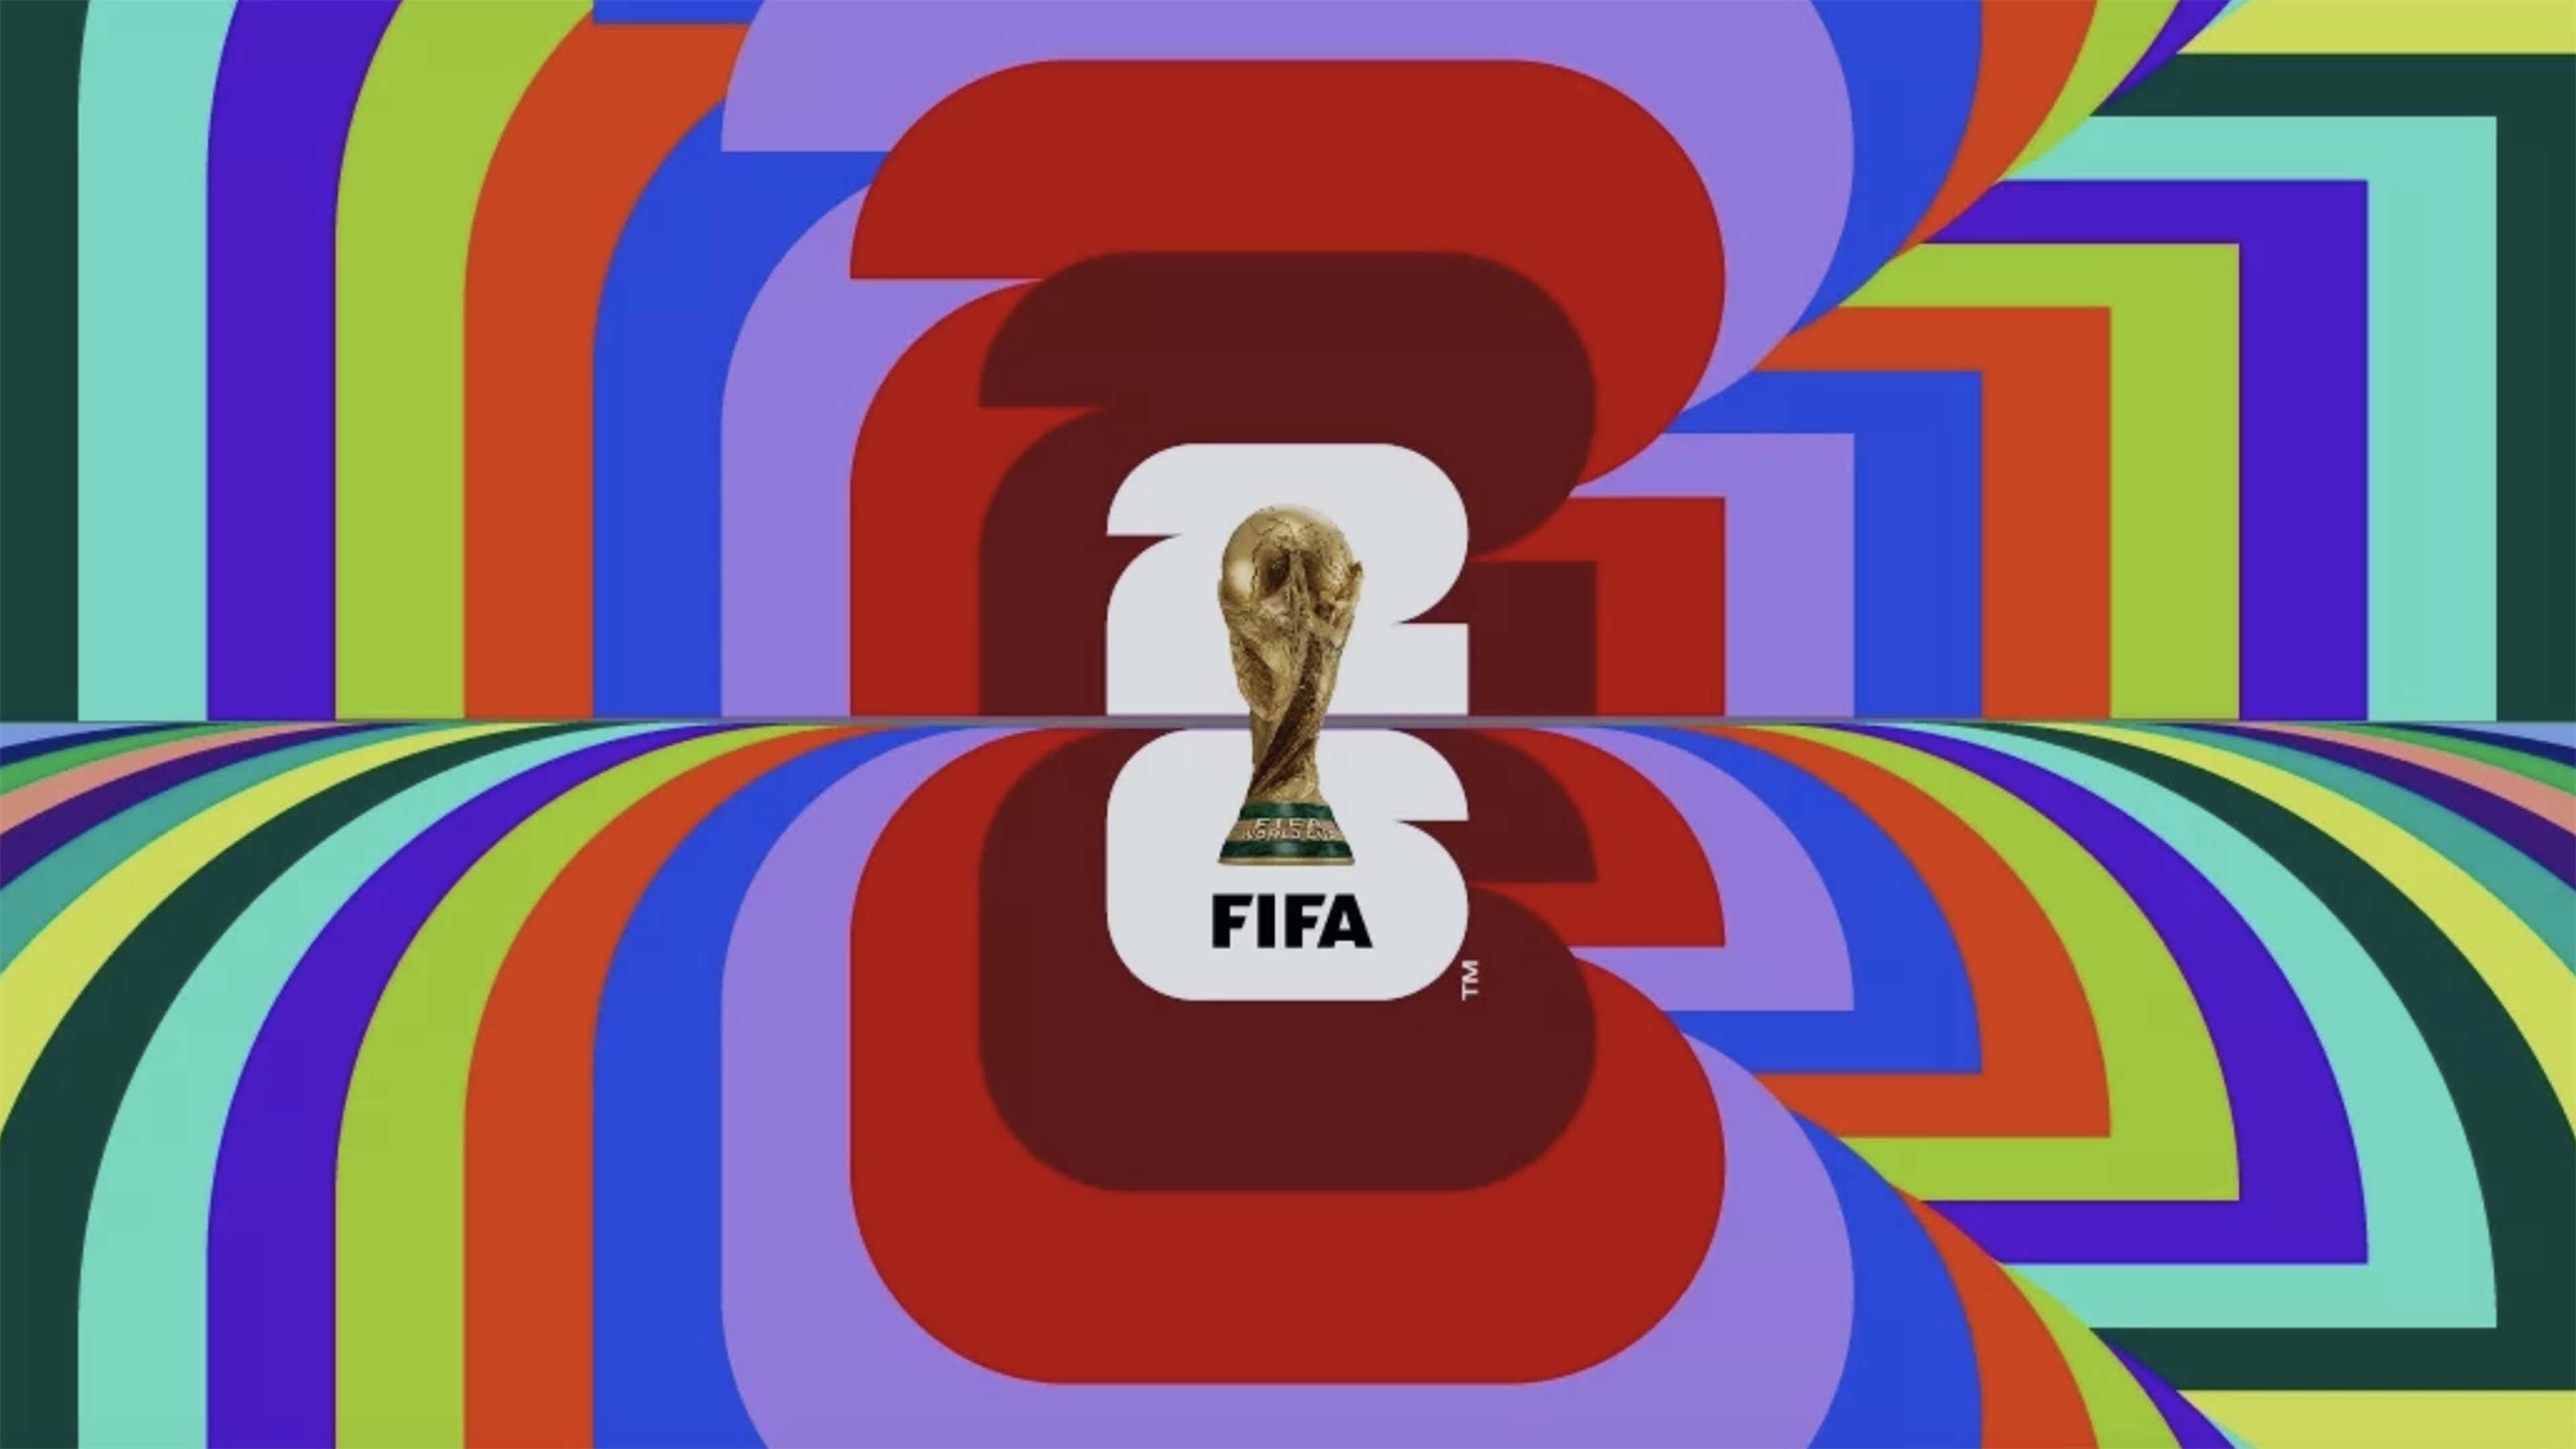 FIFA World Cup 2026 brand